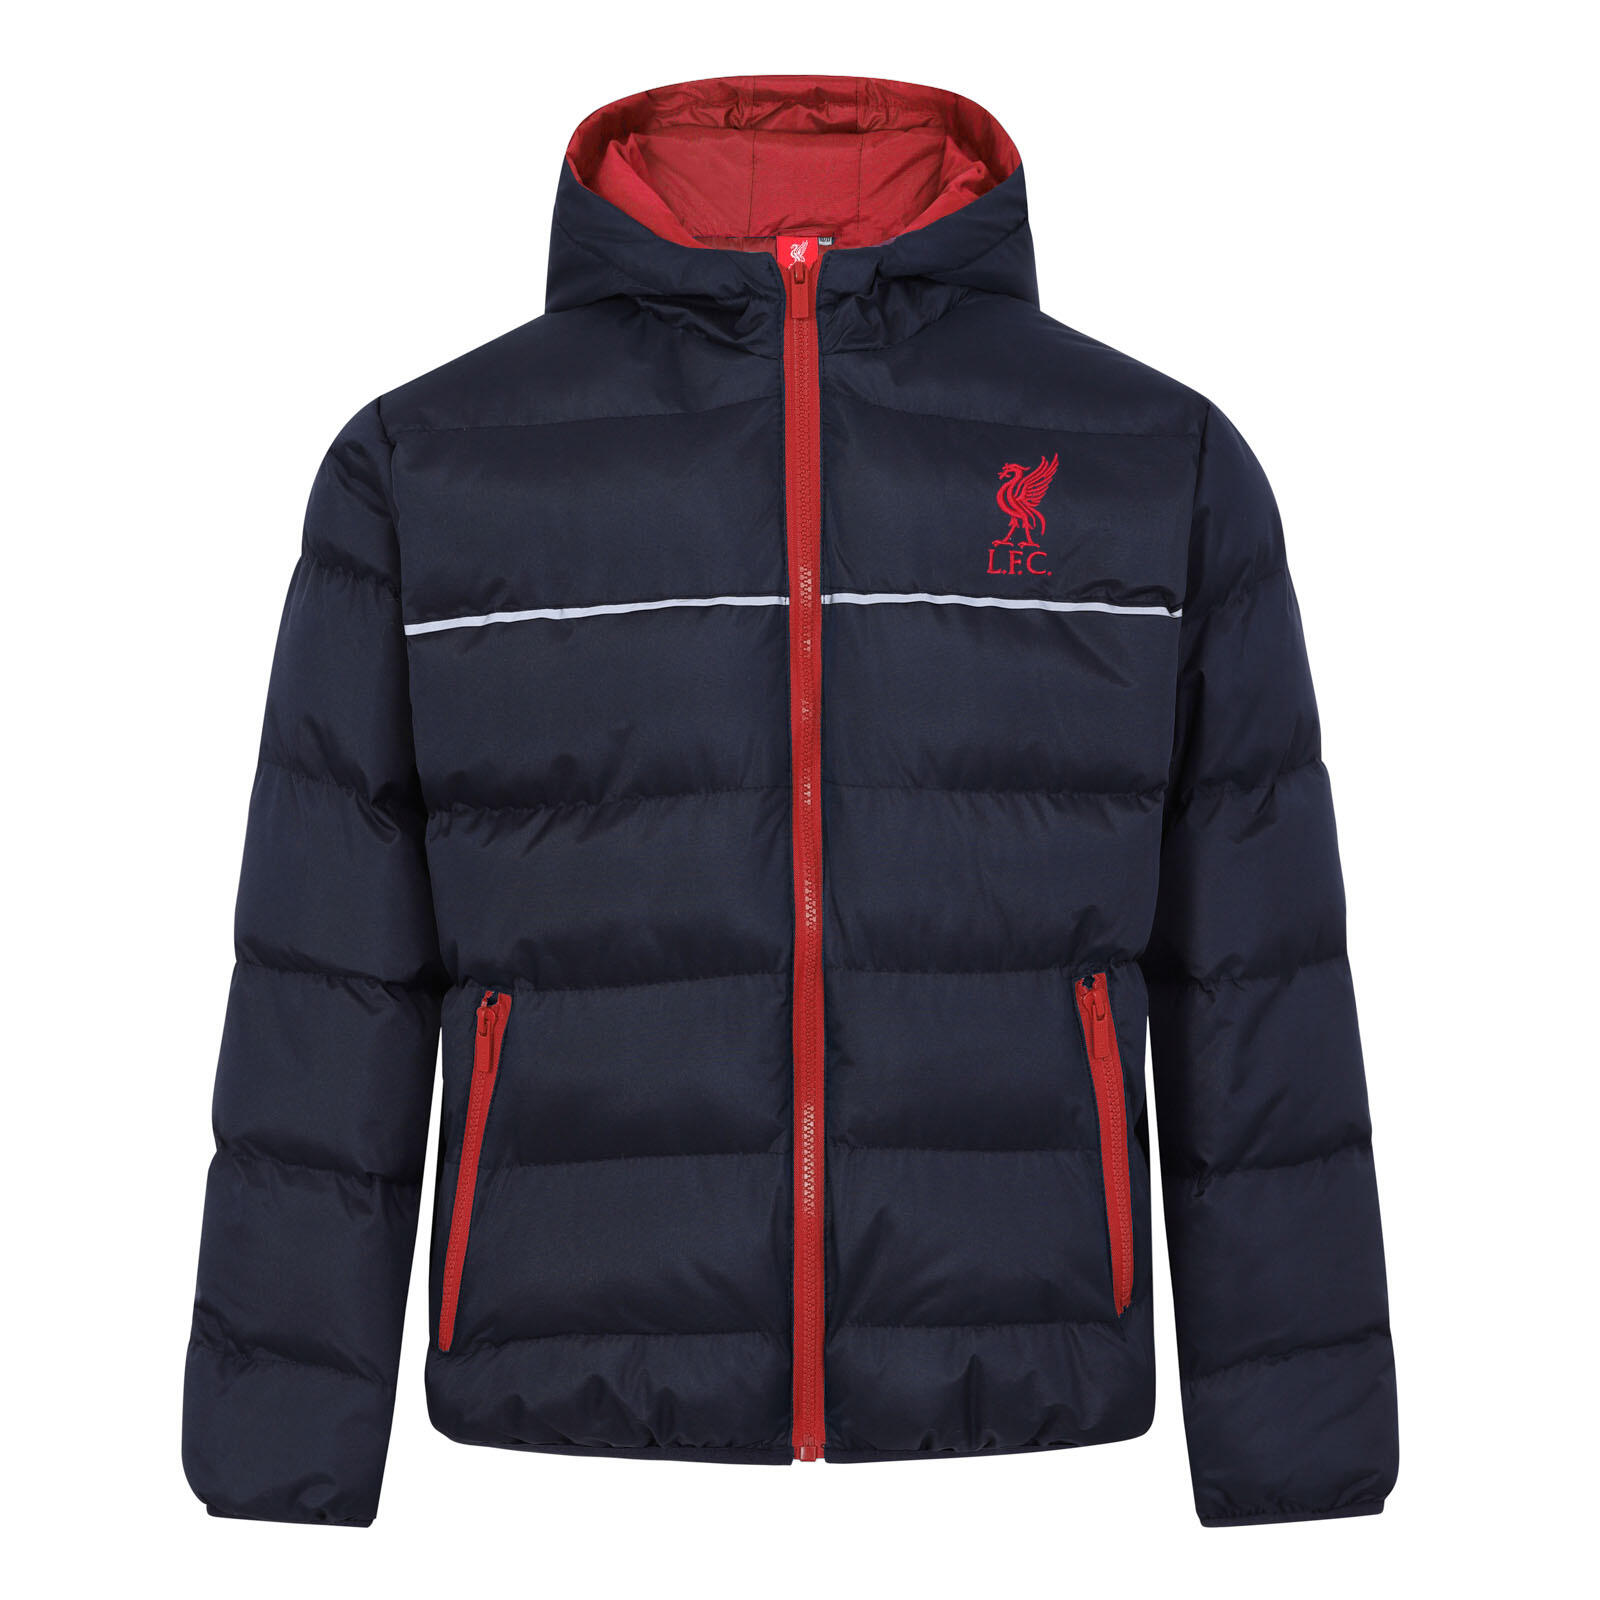 LIVERPOOL FC Liverpool FC Boys Jacket Hooded Winter Quilted Kids OFFICIAL Football Gift